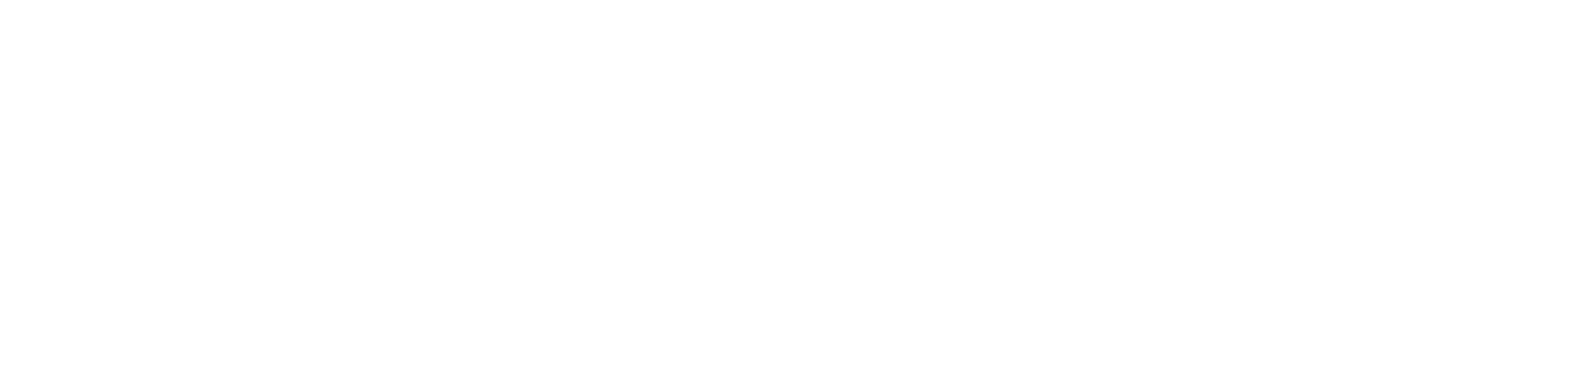 Doximity logo large for dark backgrounds (transparent PNG)